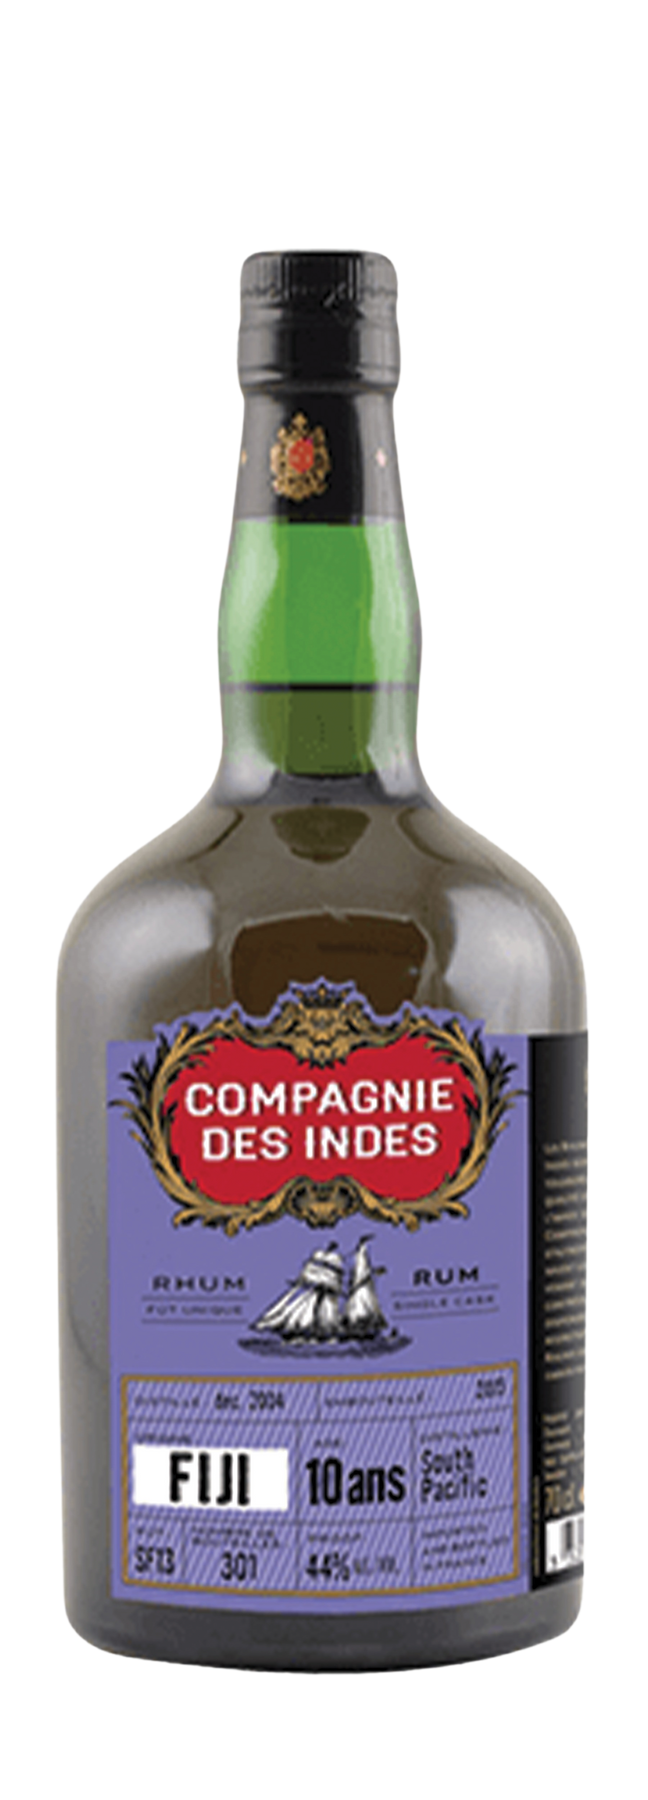 13 Years Old Fiji Compagnie Des Indes 44% 2004 70cl